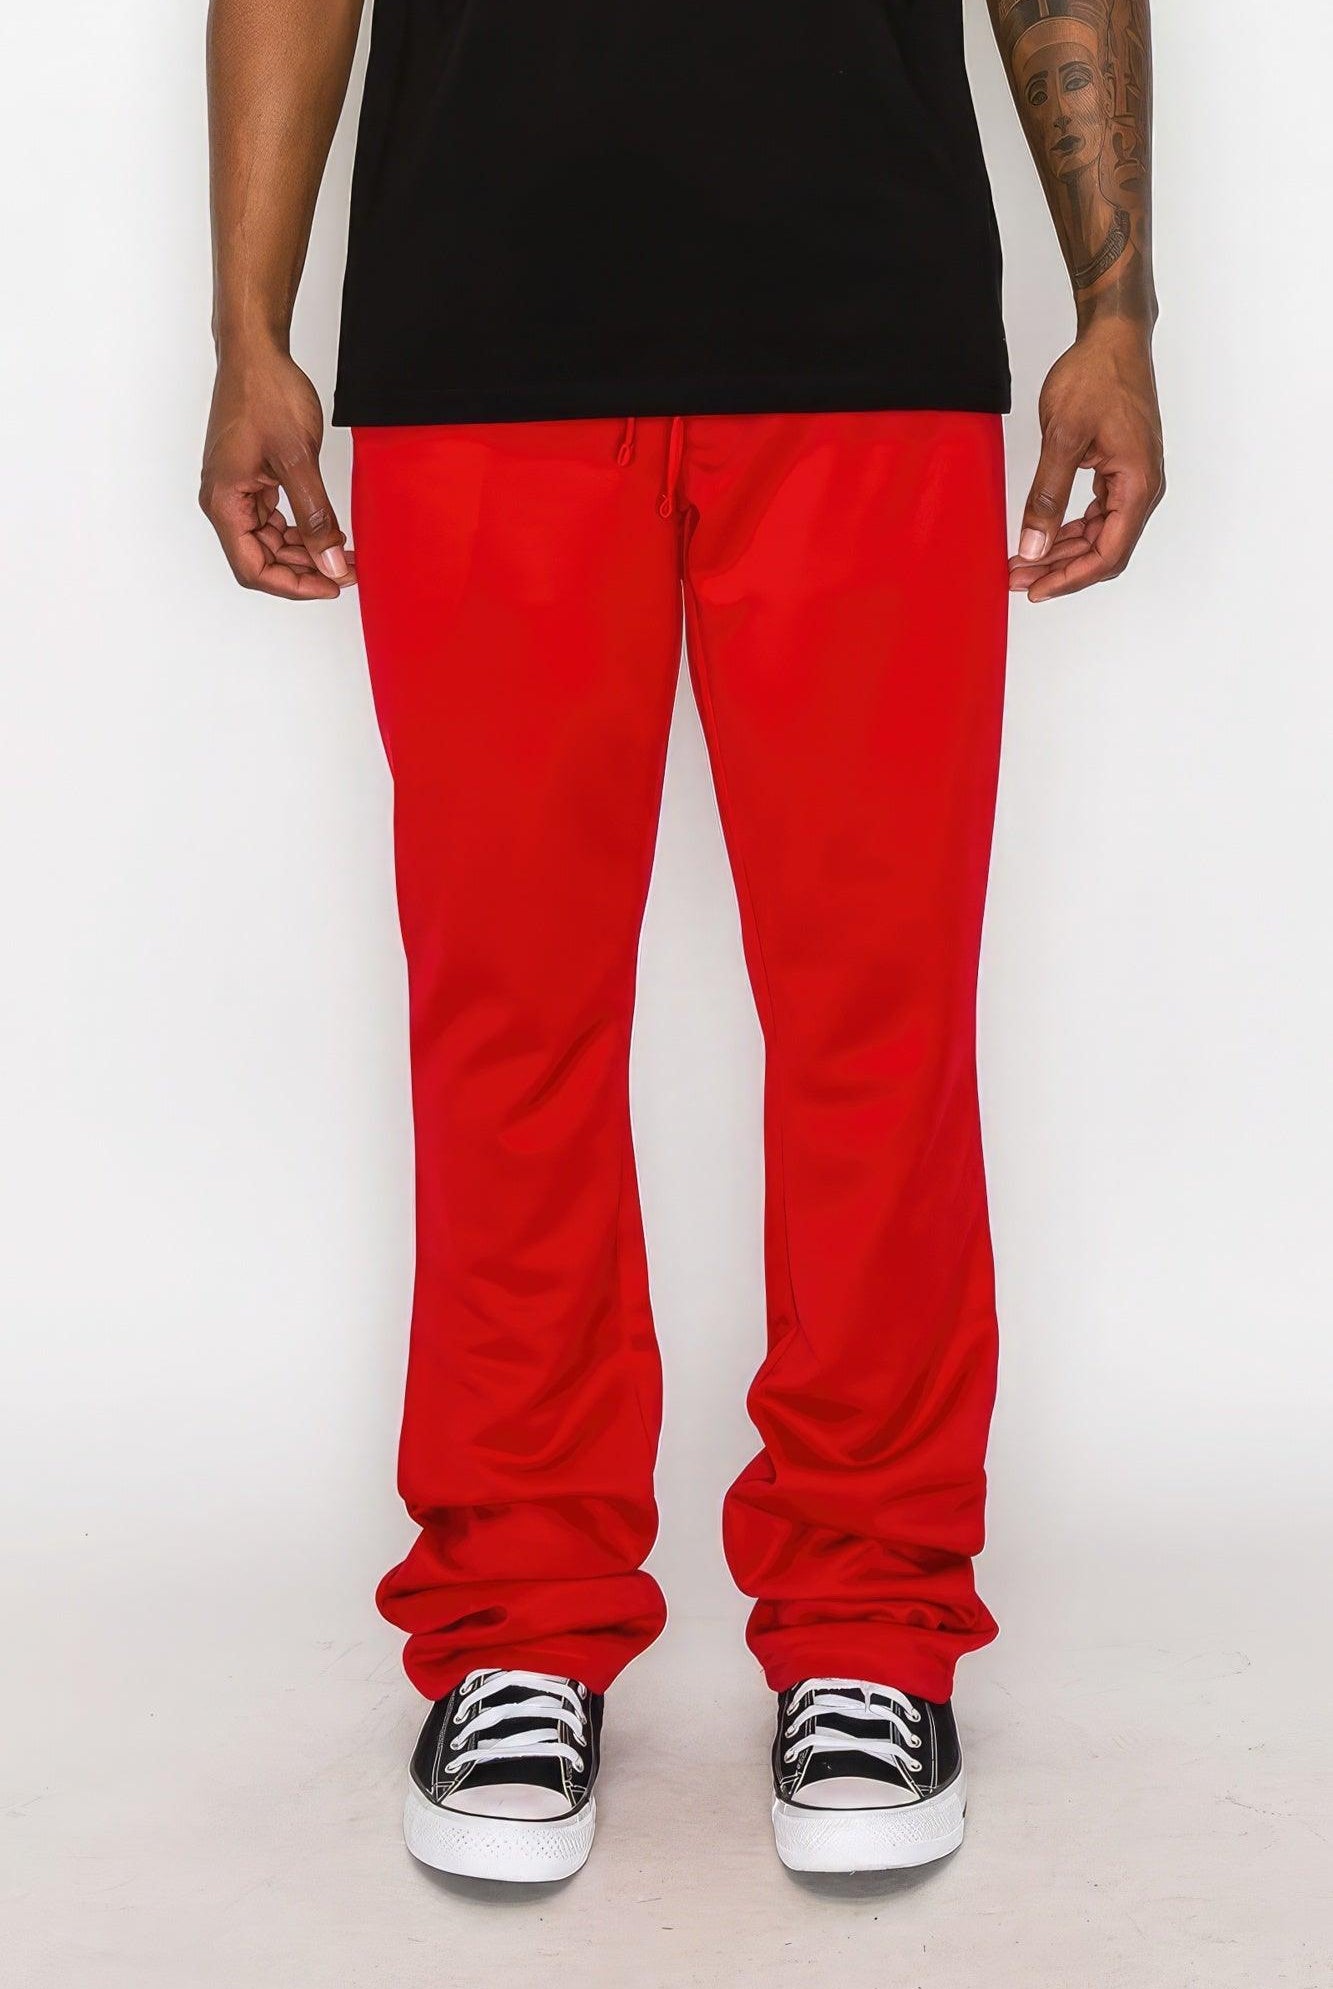 Men's Pants - Joggers Red Solid Flare Stacked Track Pants